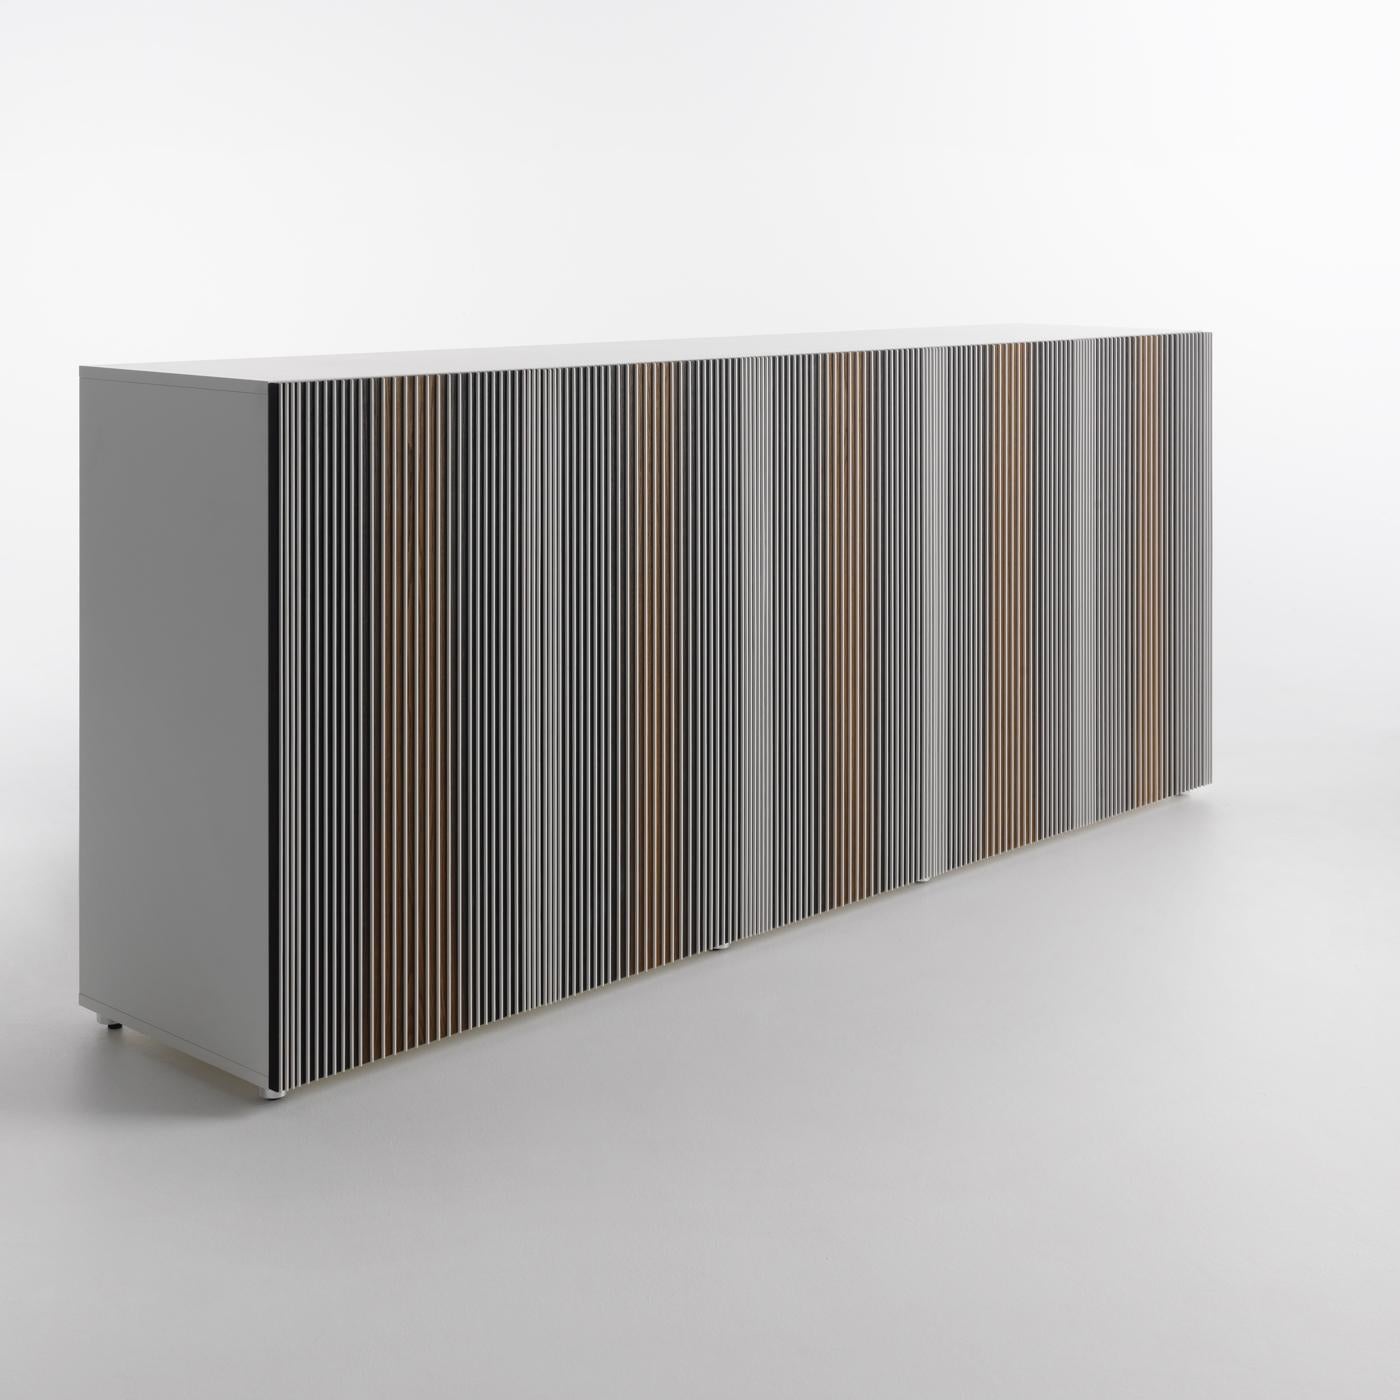 Inspired by the work of Venezuelan artist Carlos Cruz-Diez and his Op Art style, this impeccable five door-sideboard by Renato Zamberlan is an innovative piece of functional decor. Crafted of thermo-treated oak with a mocha finish and white HPL